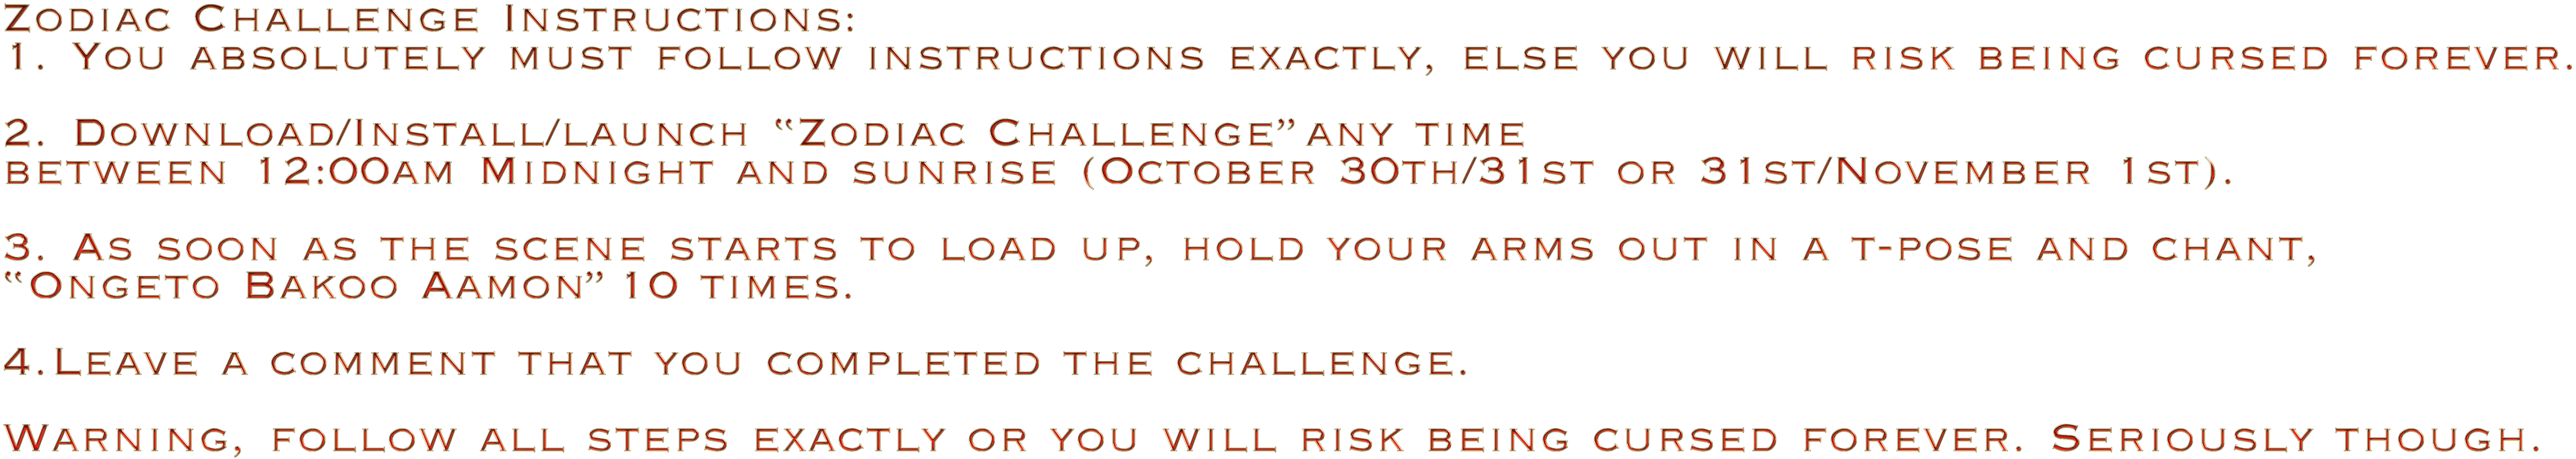 Zodiac Challenge Instructions.png